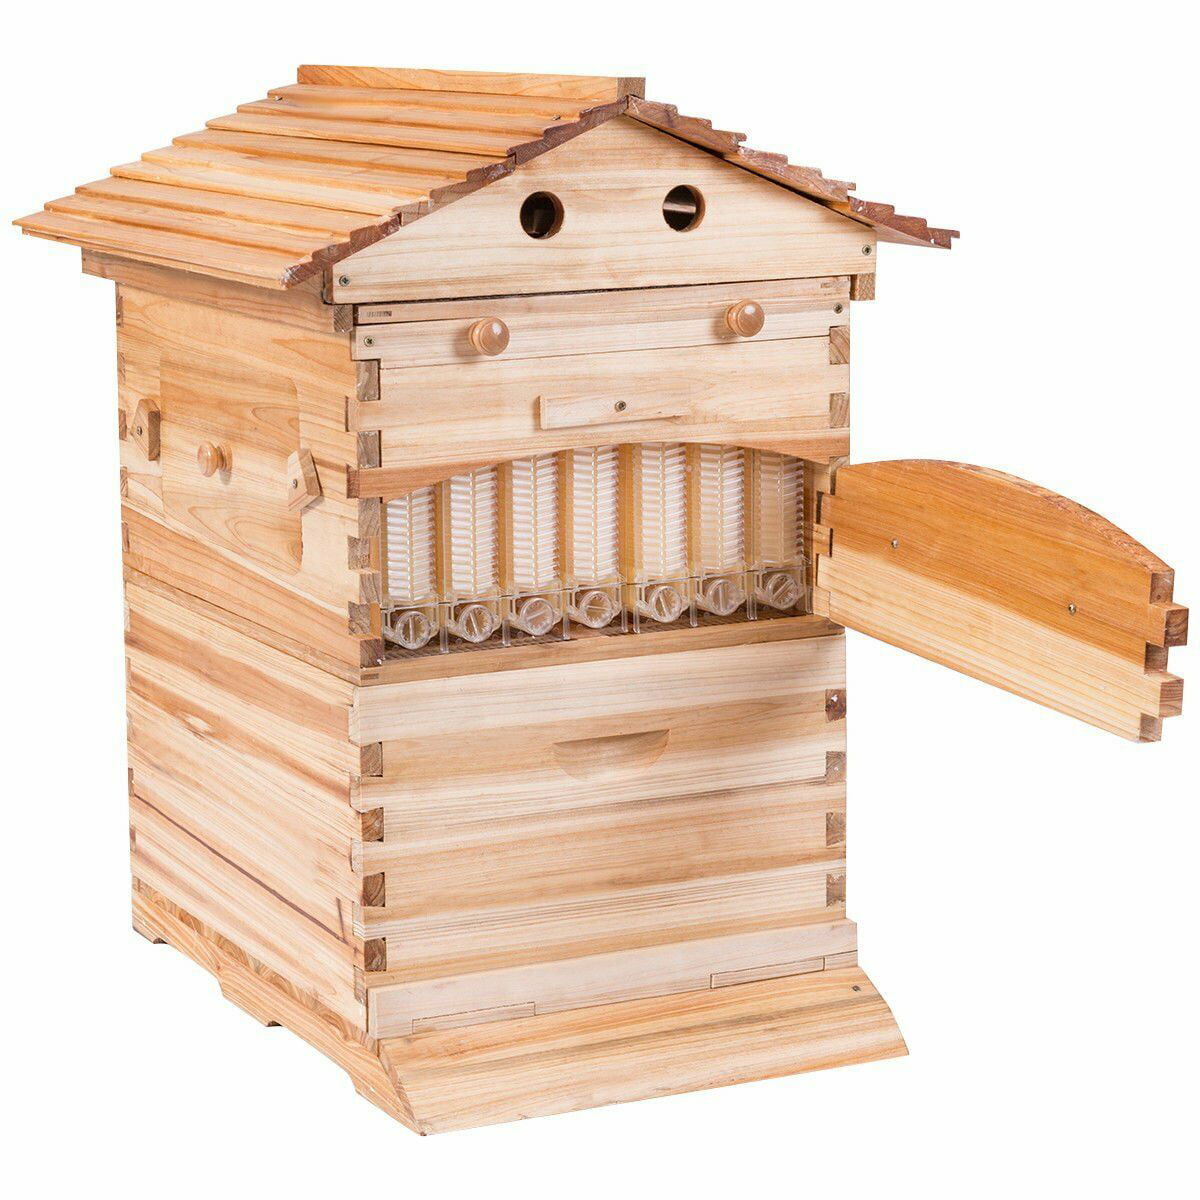 7PCS Upgraded Free Honey Beehive Frames+Beekeeping Wooden Brood House US Ship 